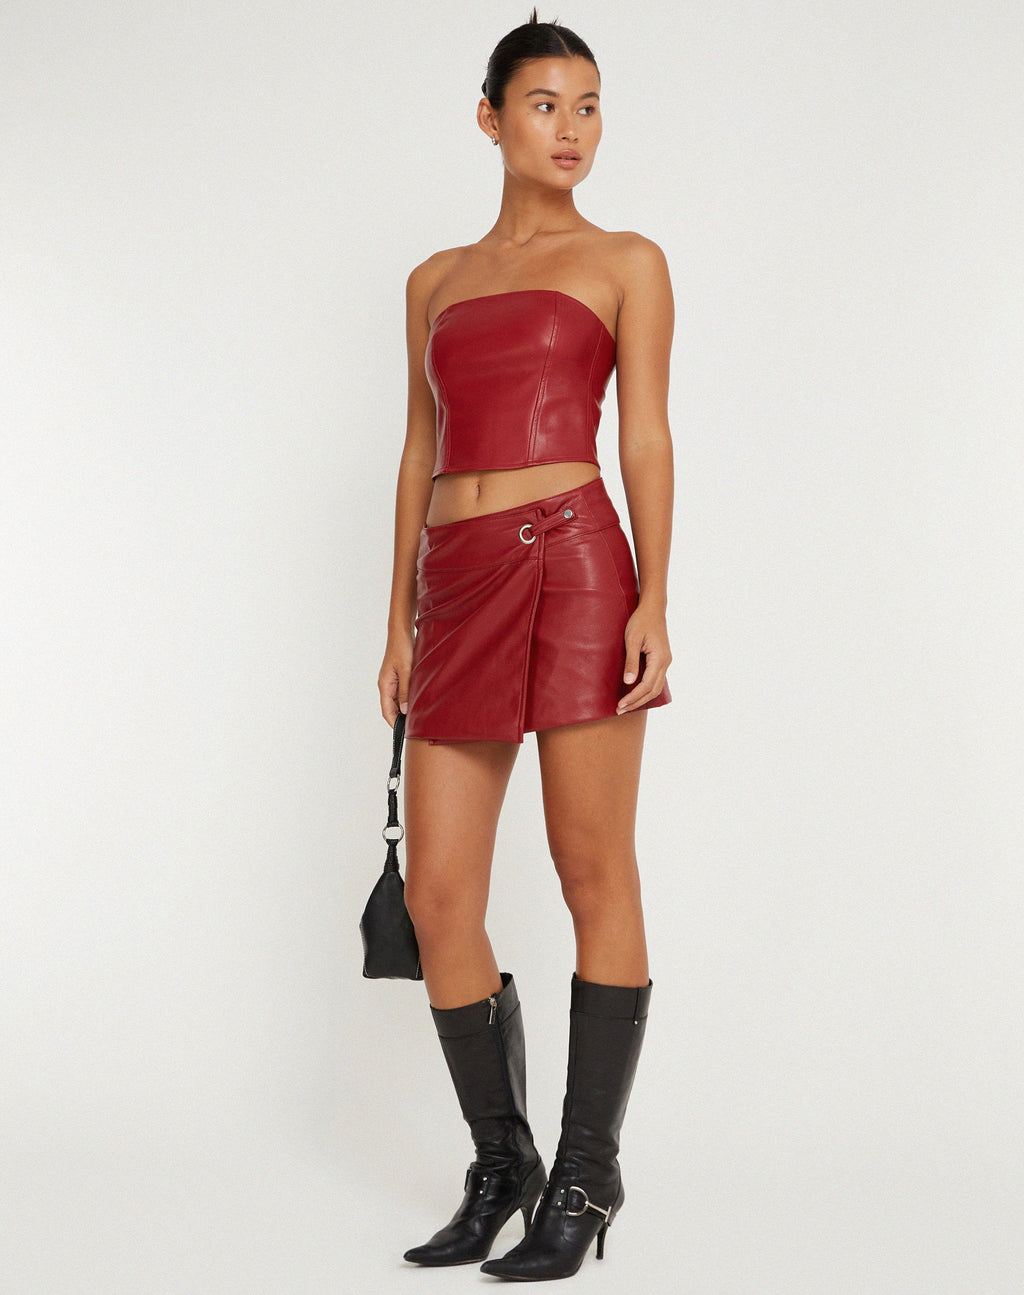 Rolo Mini Skirt in PU Blood Red